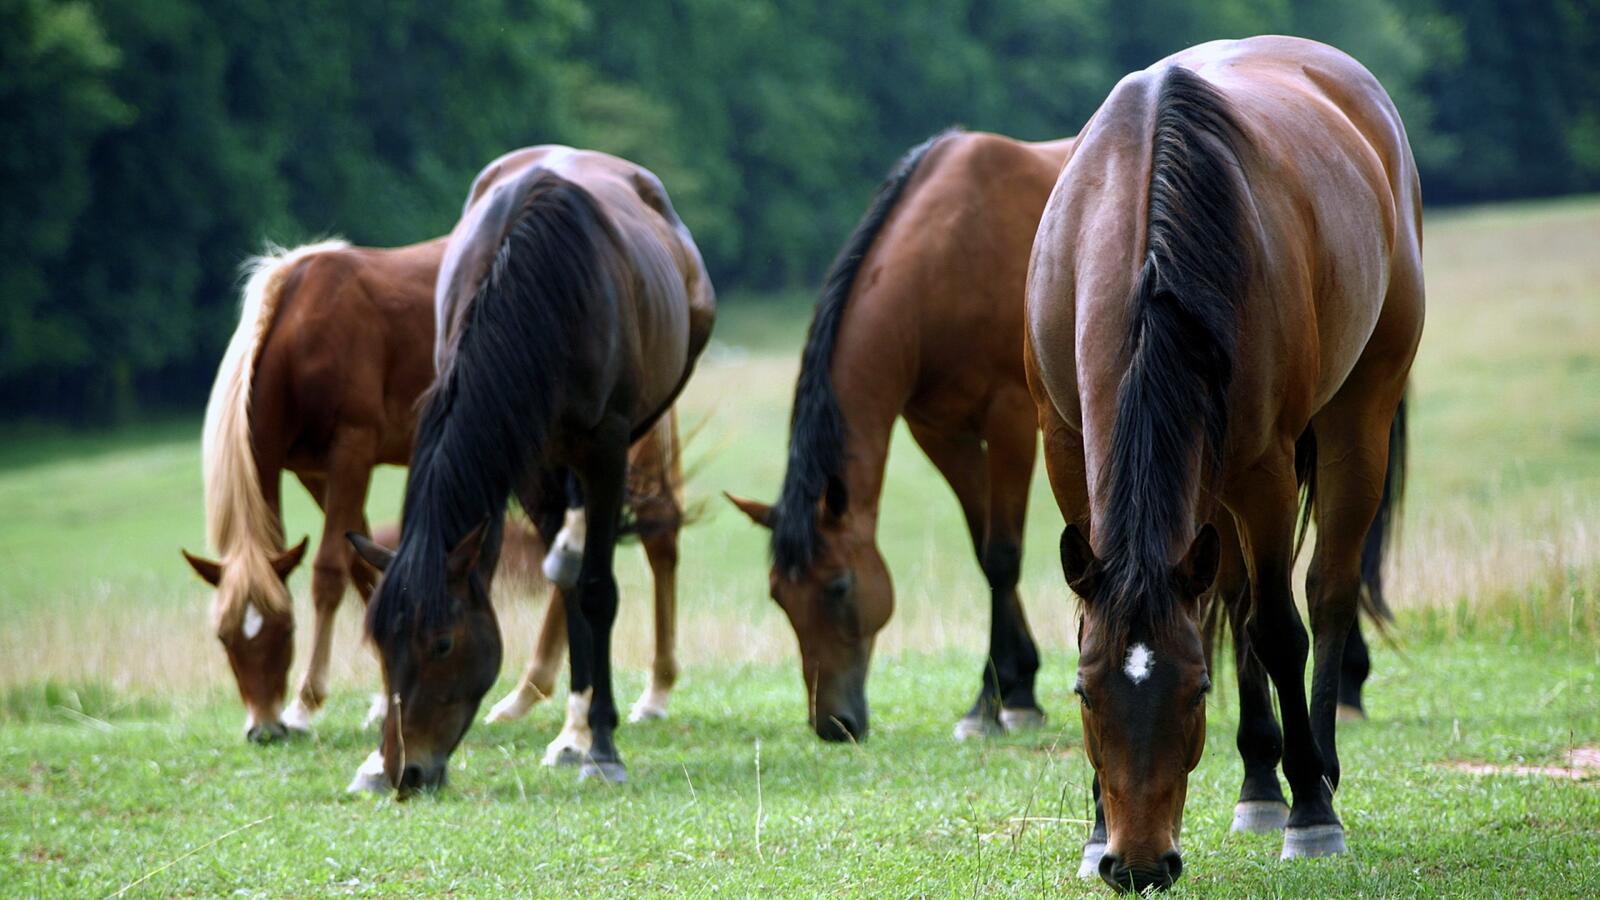 Wallpapers horses muzzles manes on the desktop